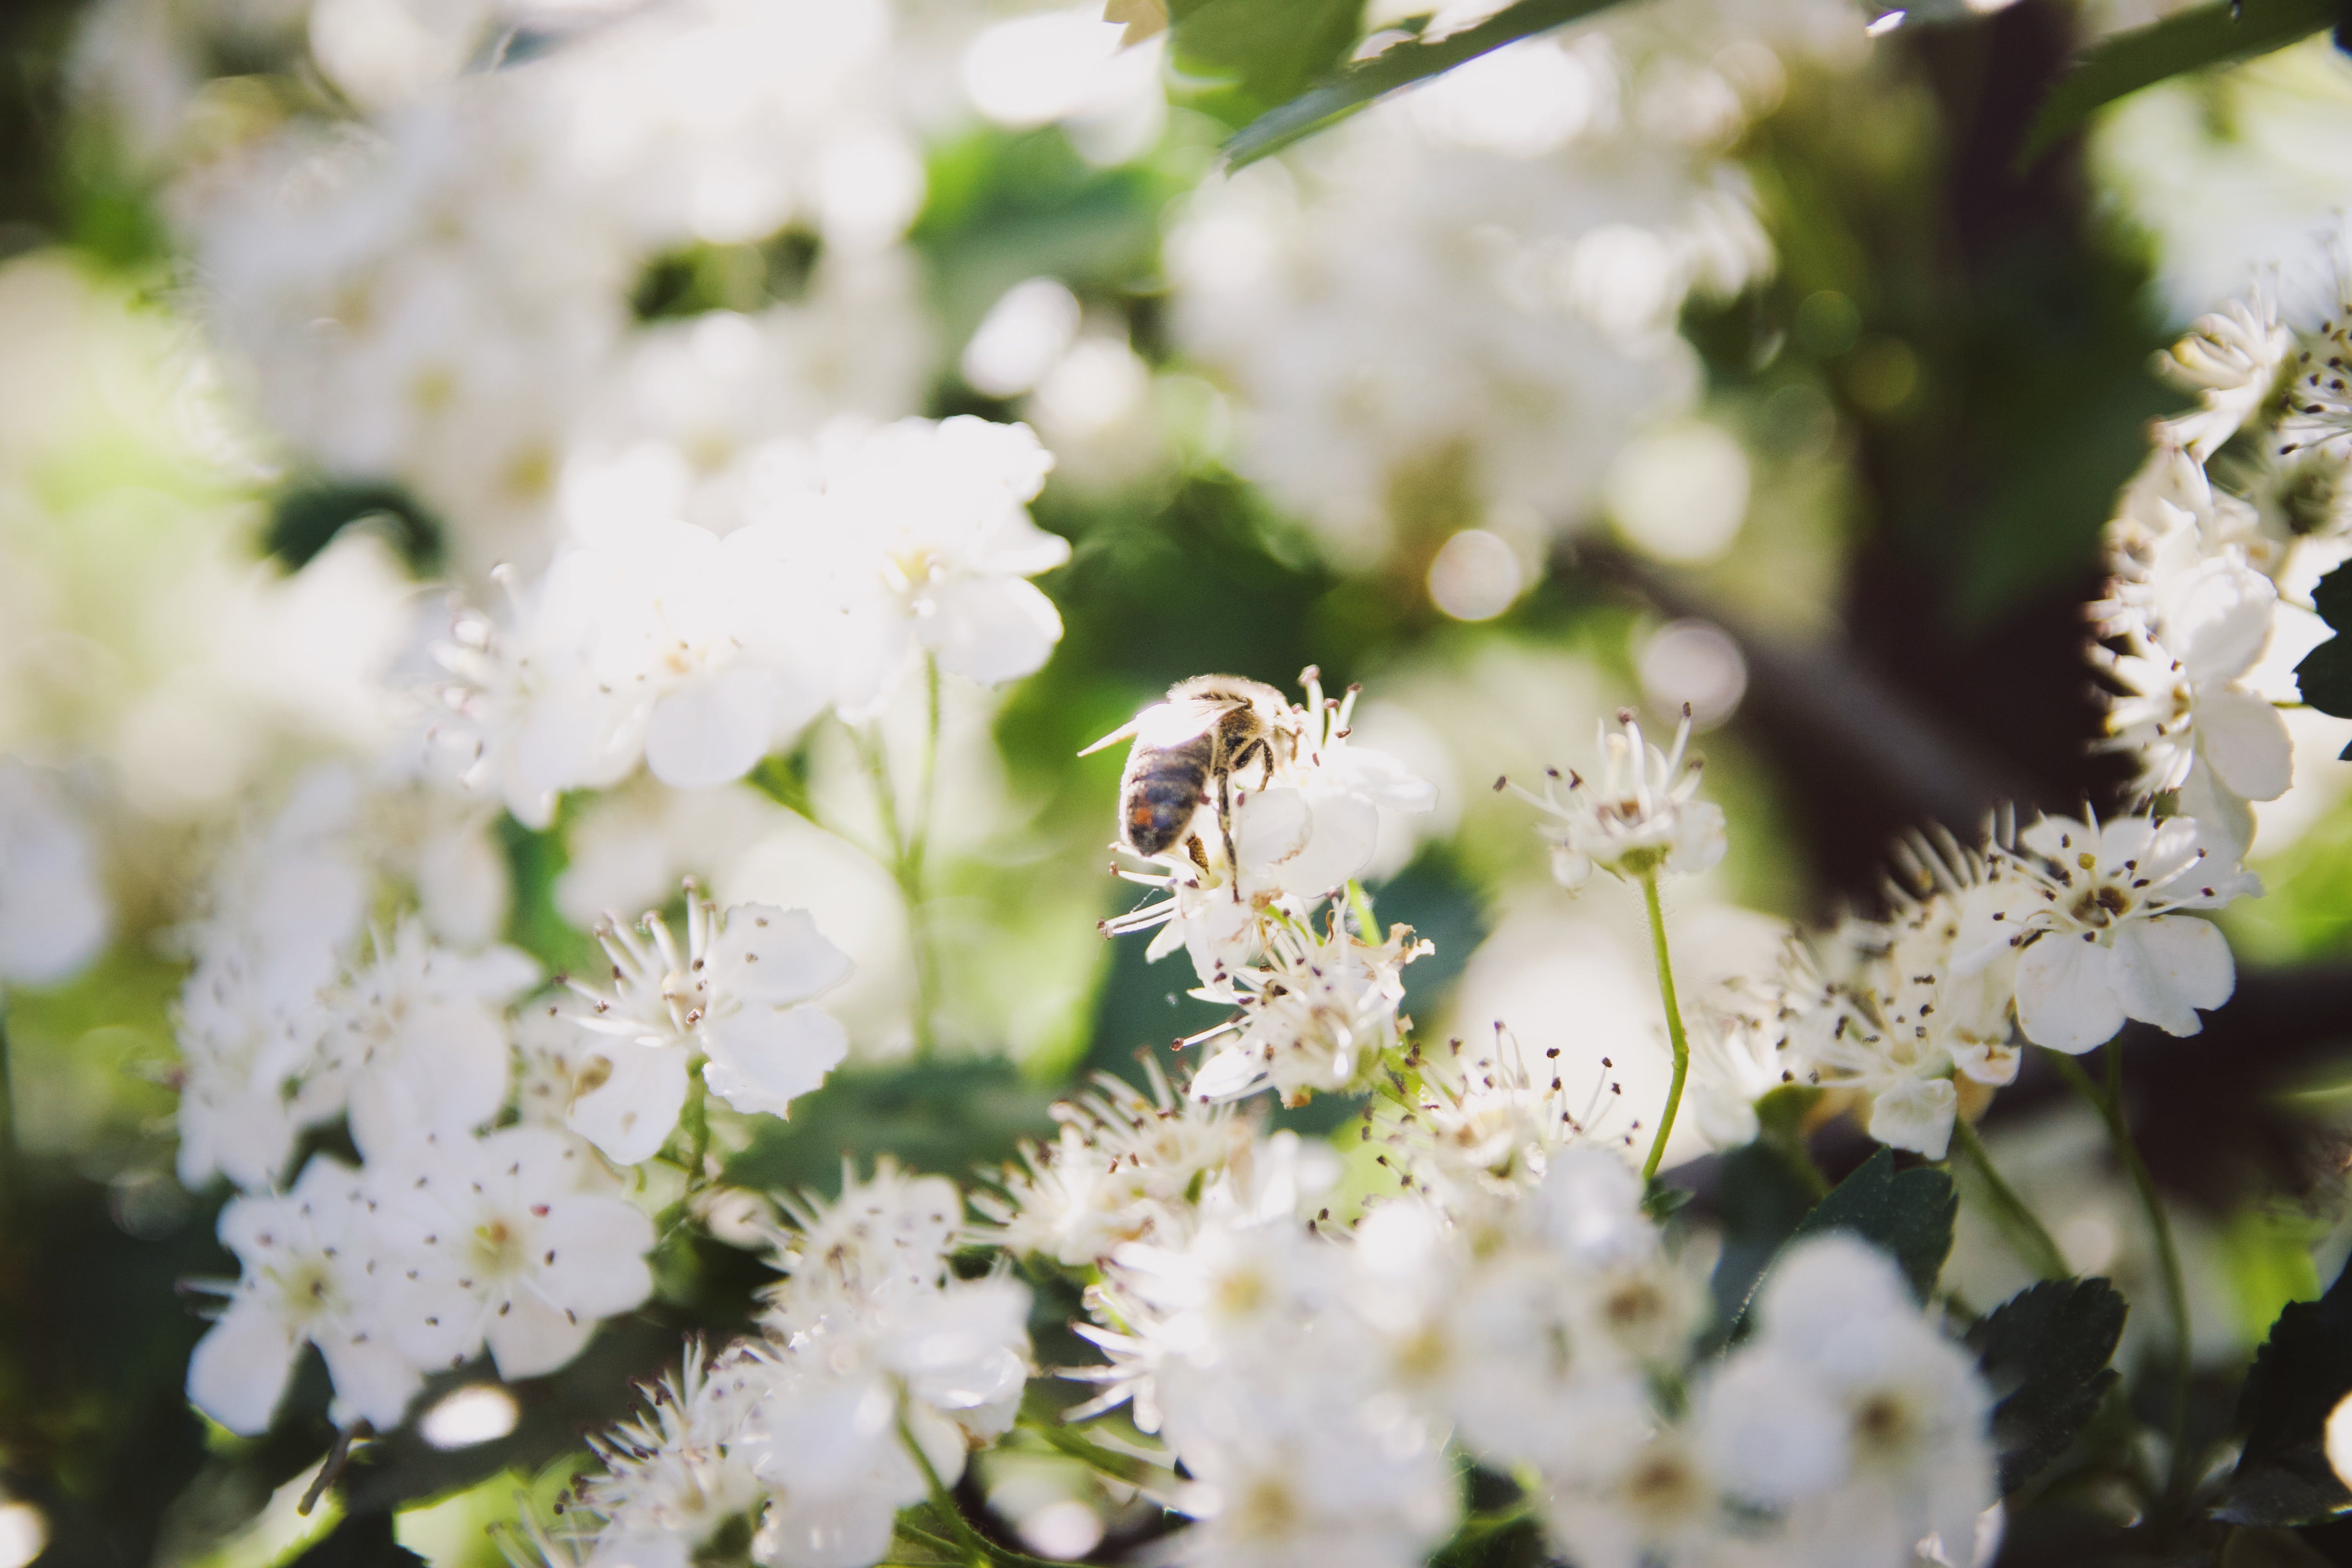 Bee collecting nectar from white blossoms on a sunny day